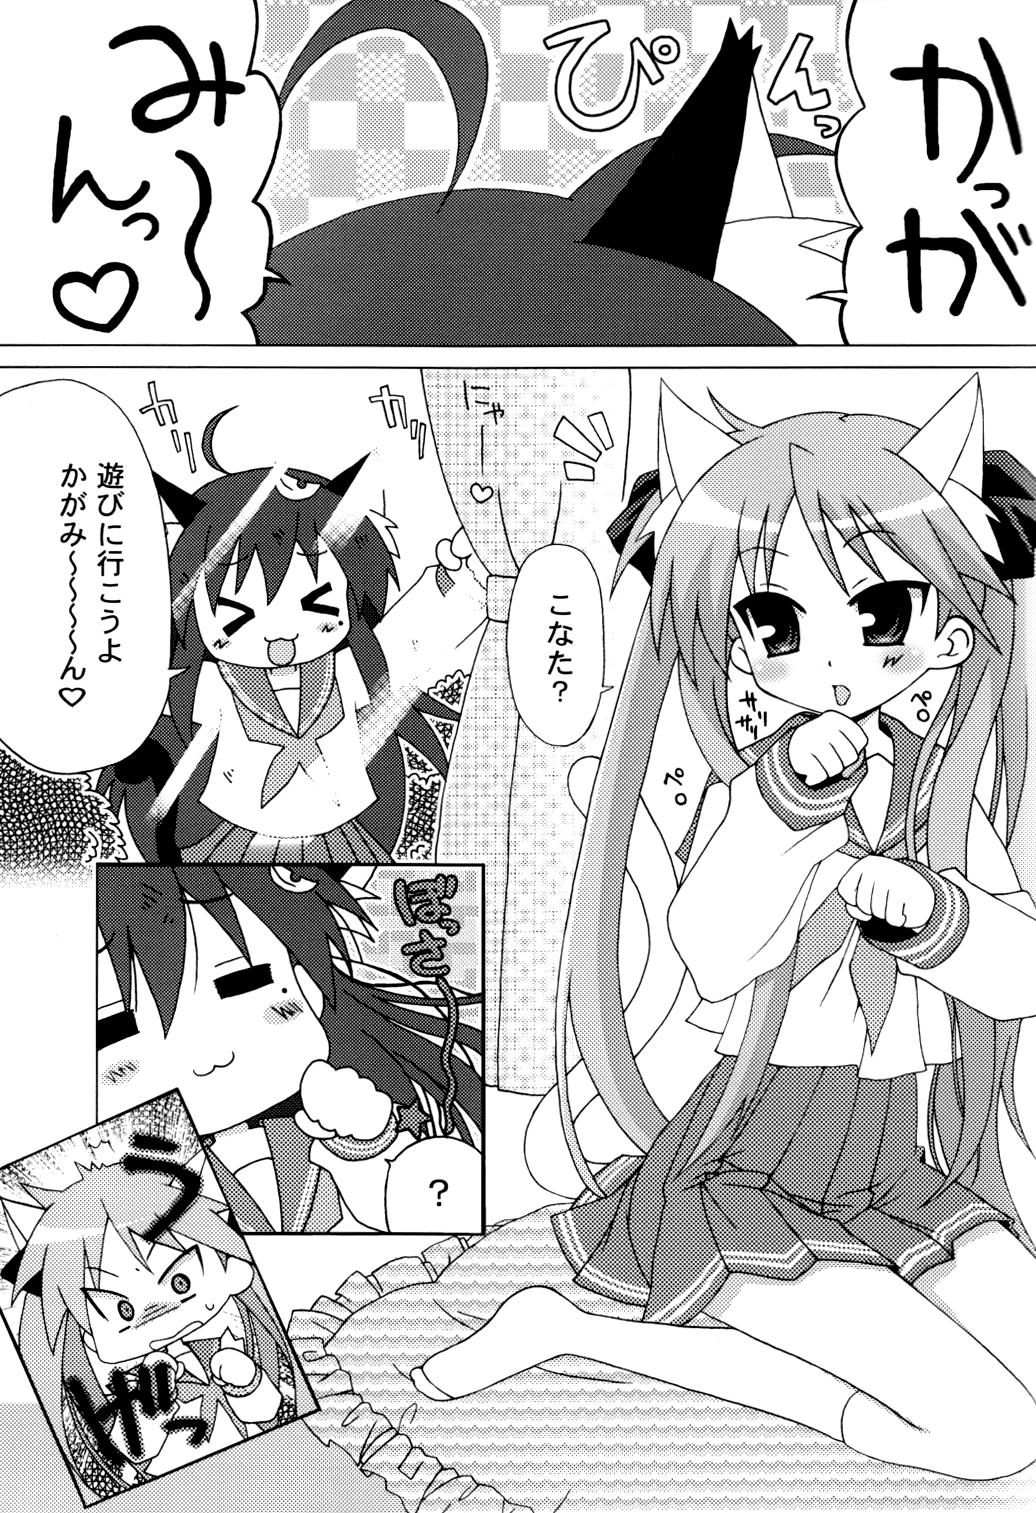 Innocent Come Come Cat! - Lucky star Culona - Page 5